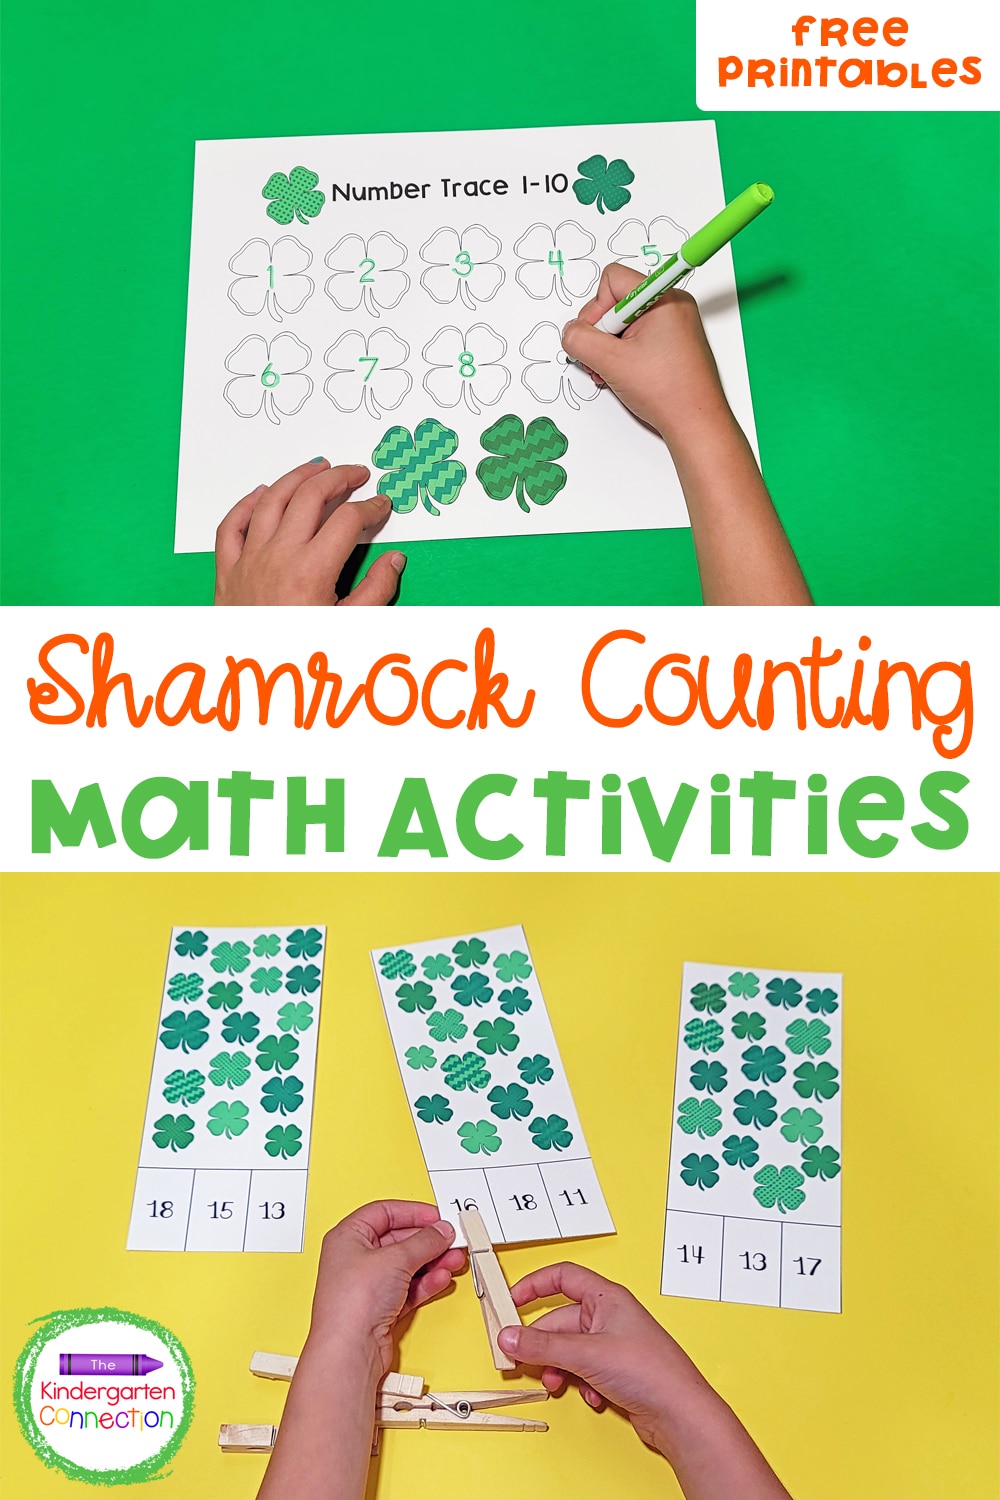 These free Four Leaf Clover Counting Printables are an easy and fun way to work on number sense and counting skills!